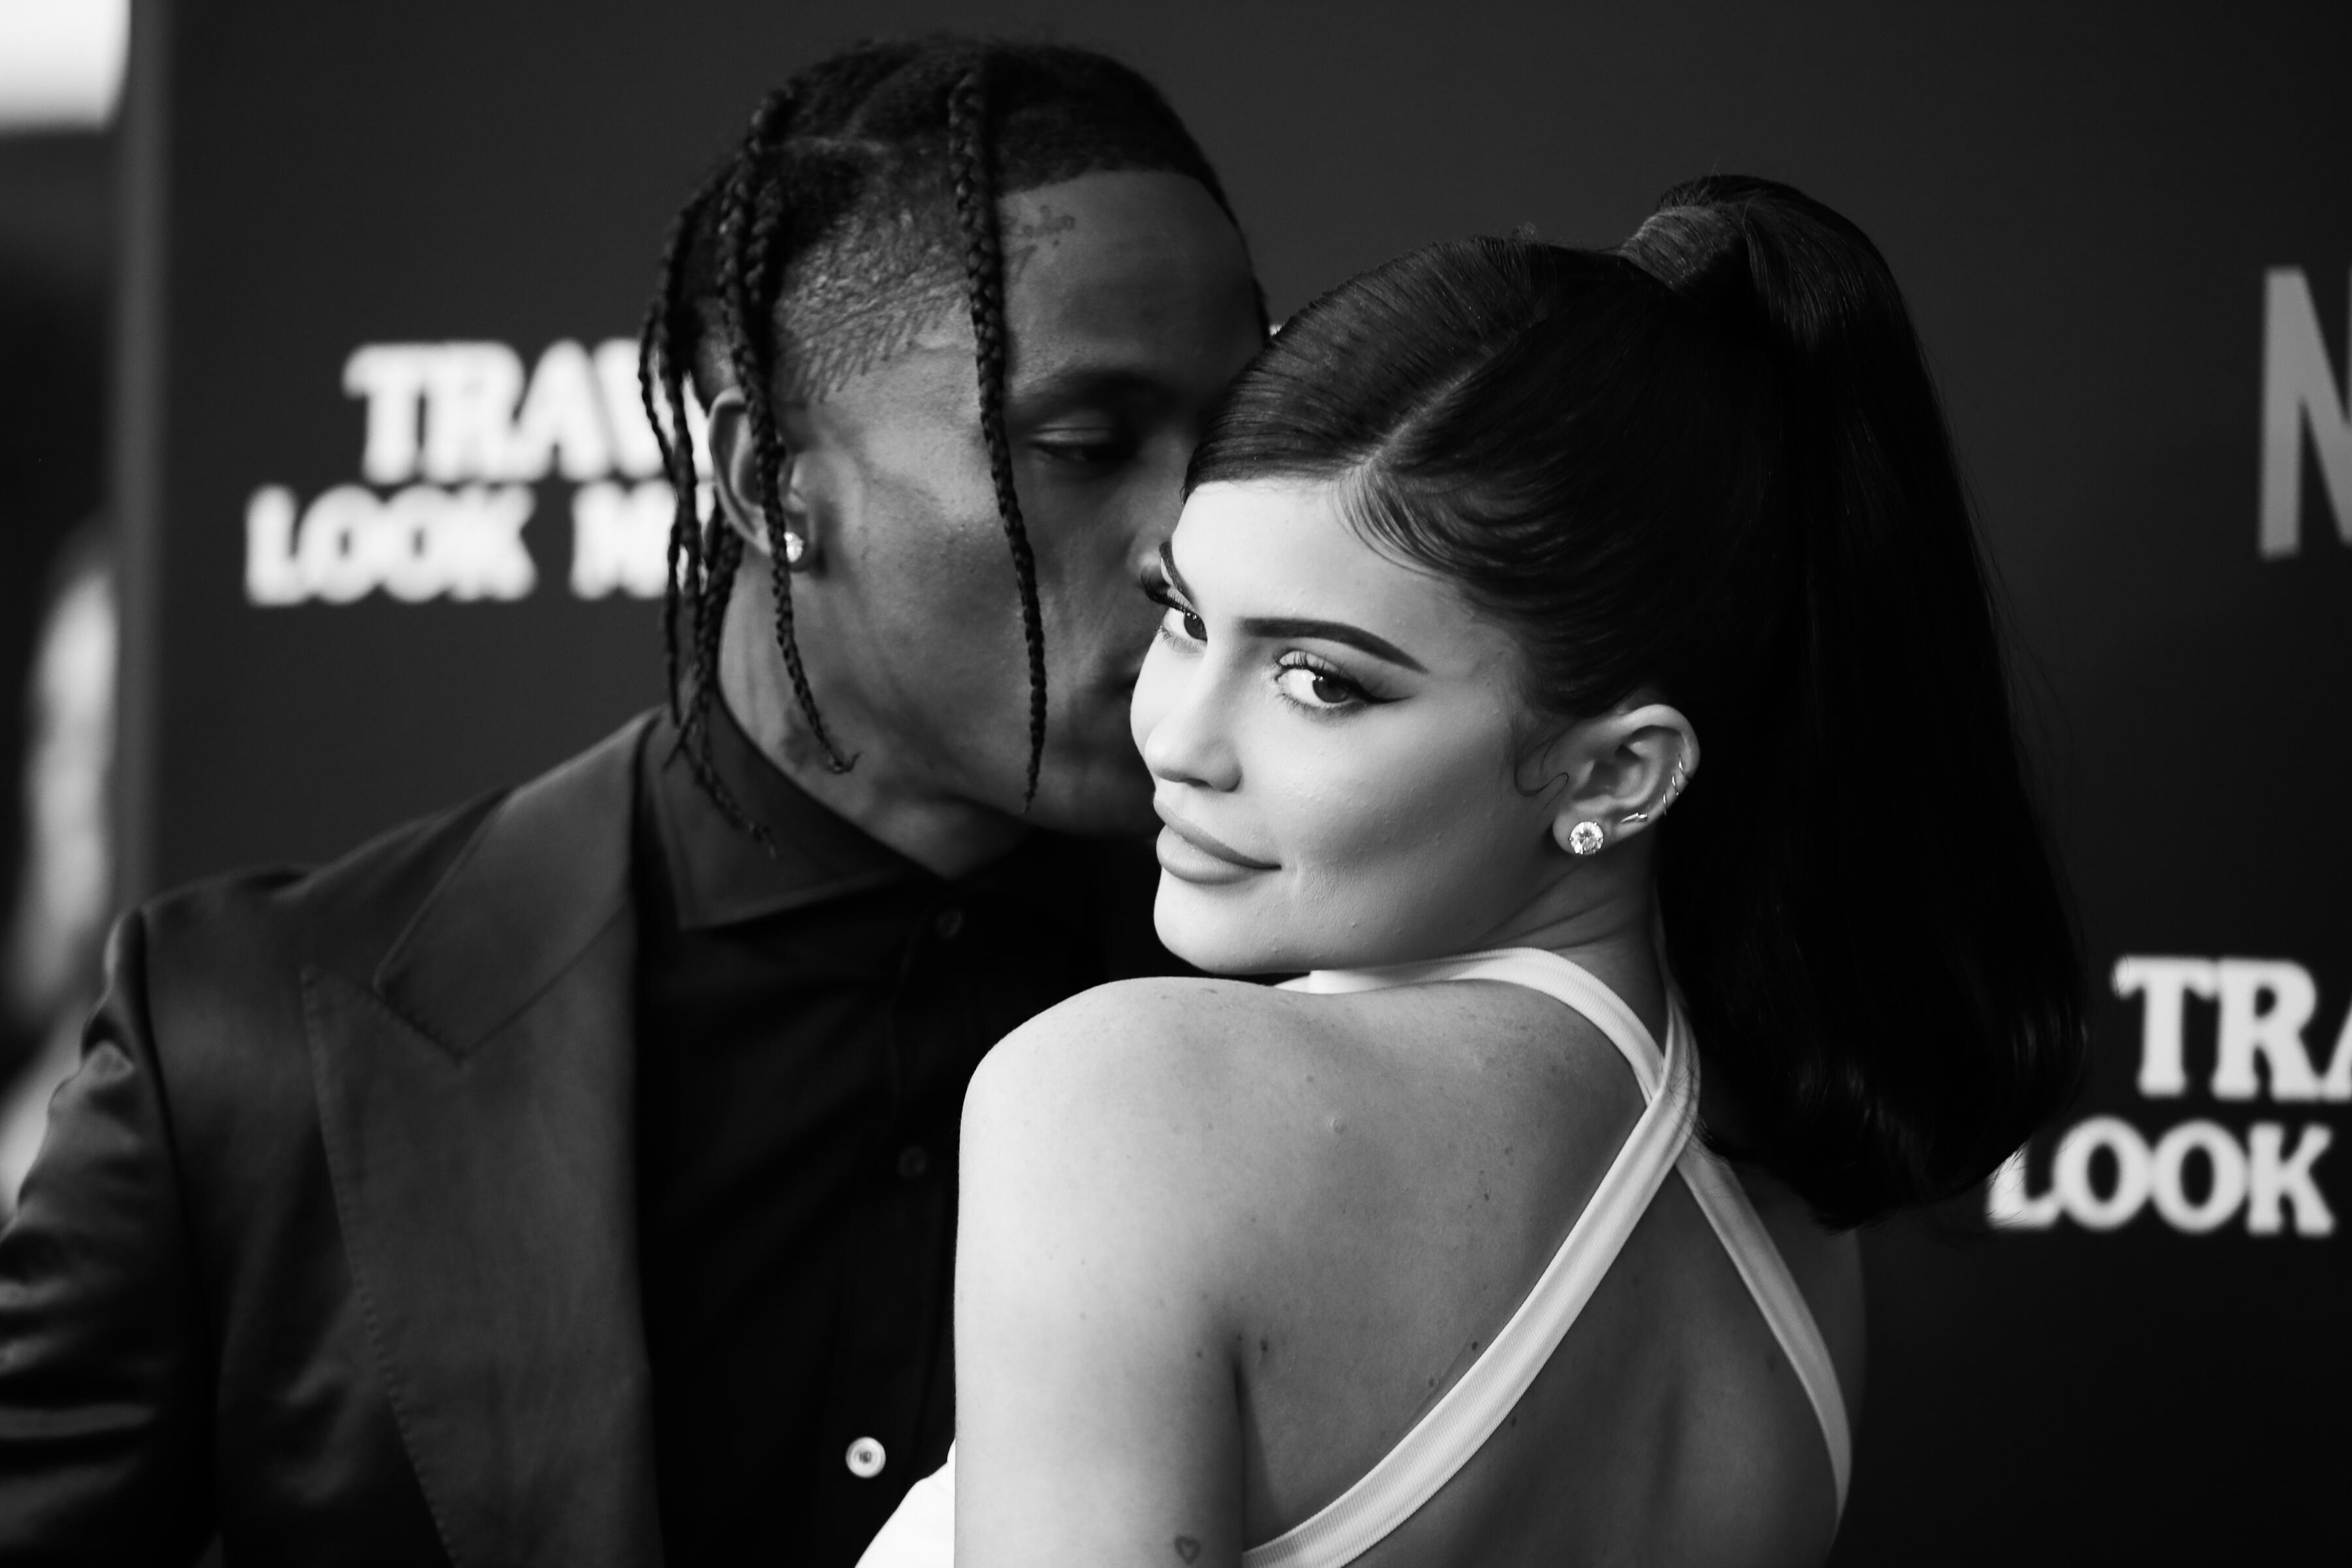 Kylie Jenner Is Going NUDE and Travis Scott is Involved! - Thumbnail Image